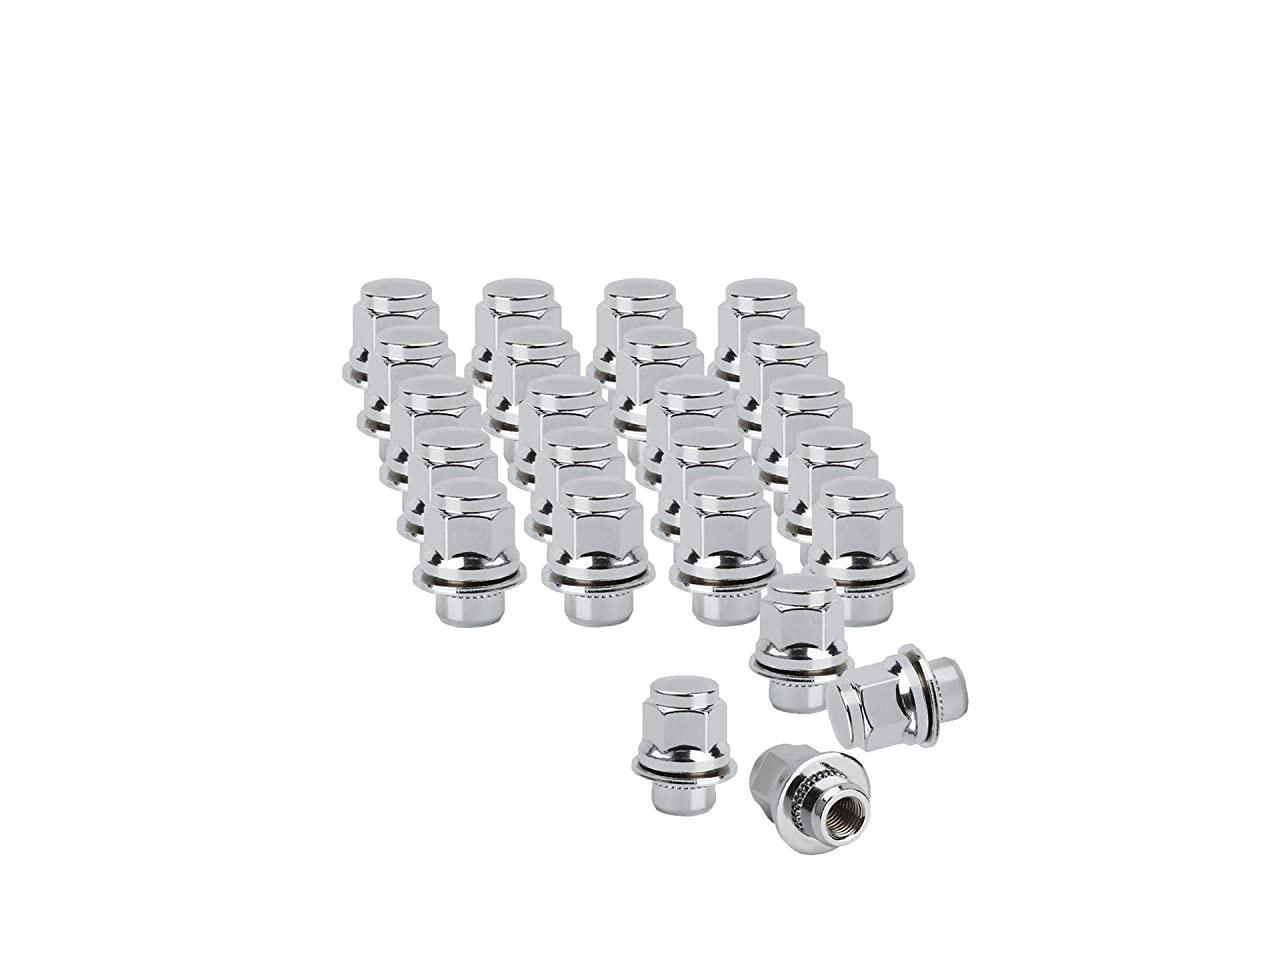 Lug Nuts 32 14 X 1.5 mm Chevy GMC OEM Open End Lugnuts 2500 